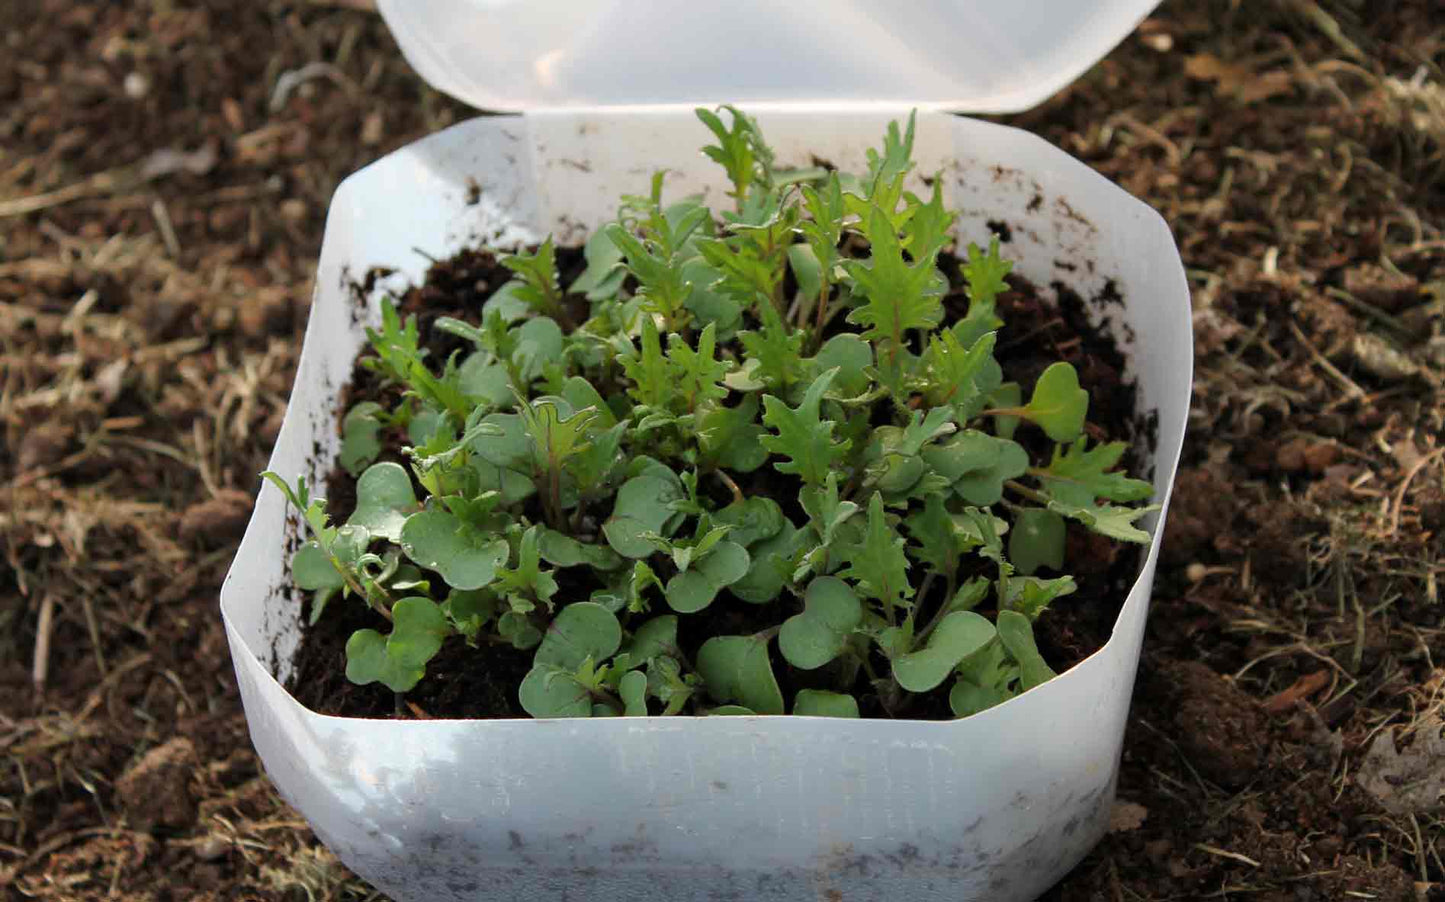 JANUARY- Winter Sowing Workshop! (in covered rows or plastic containers)